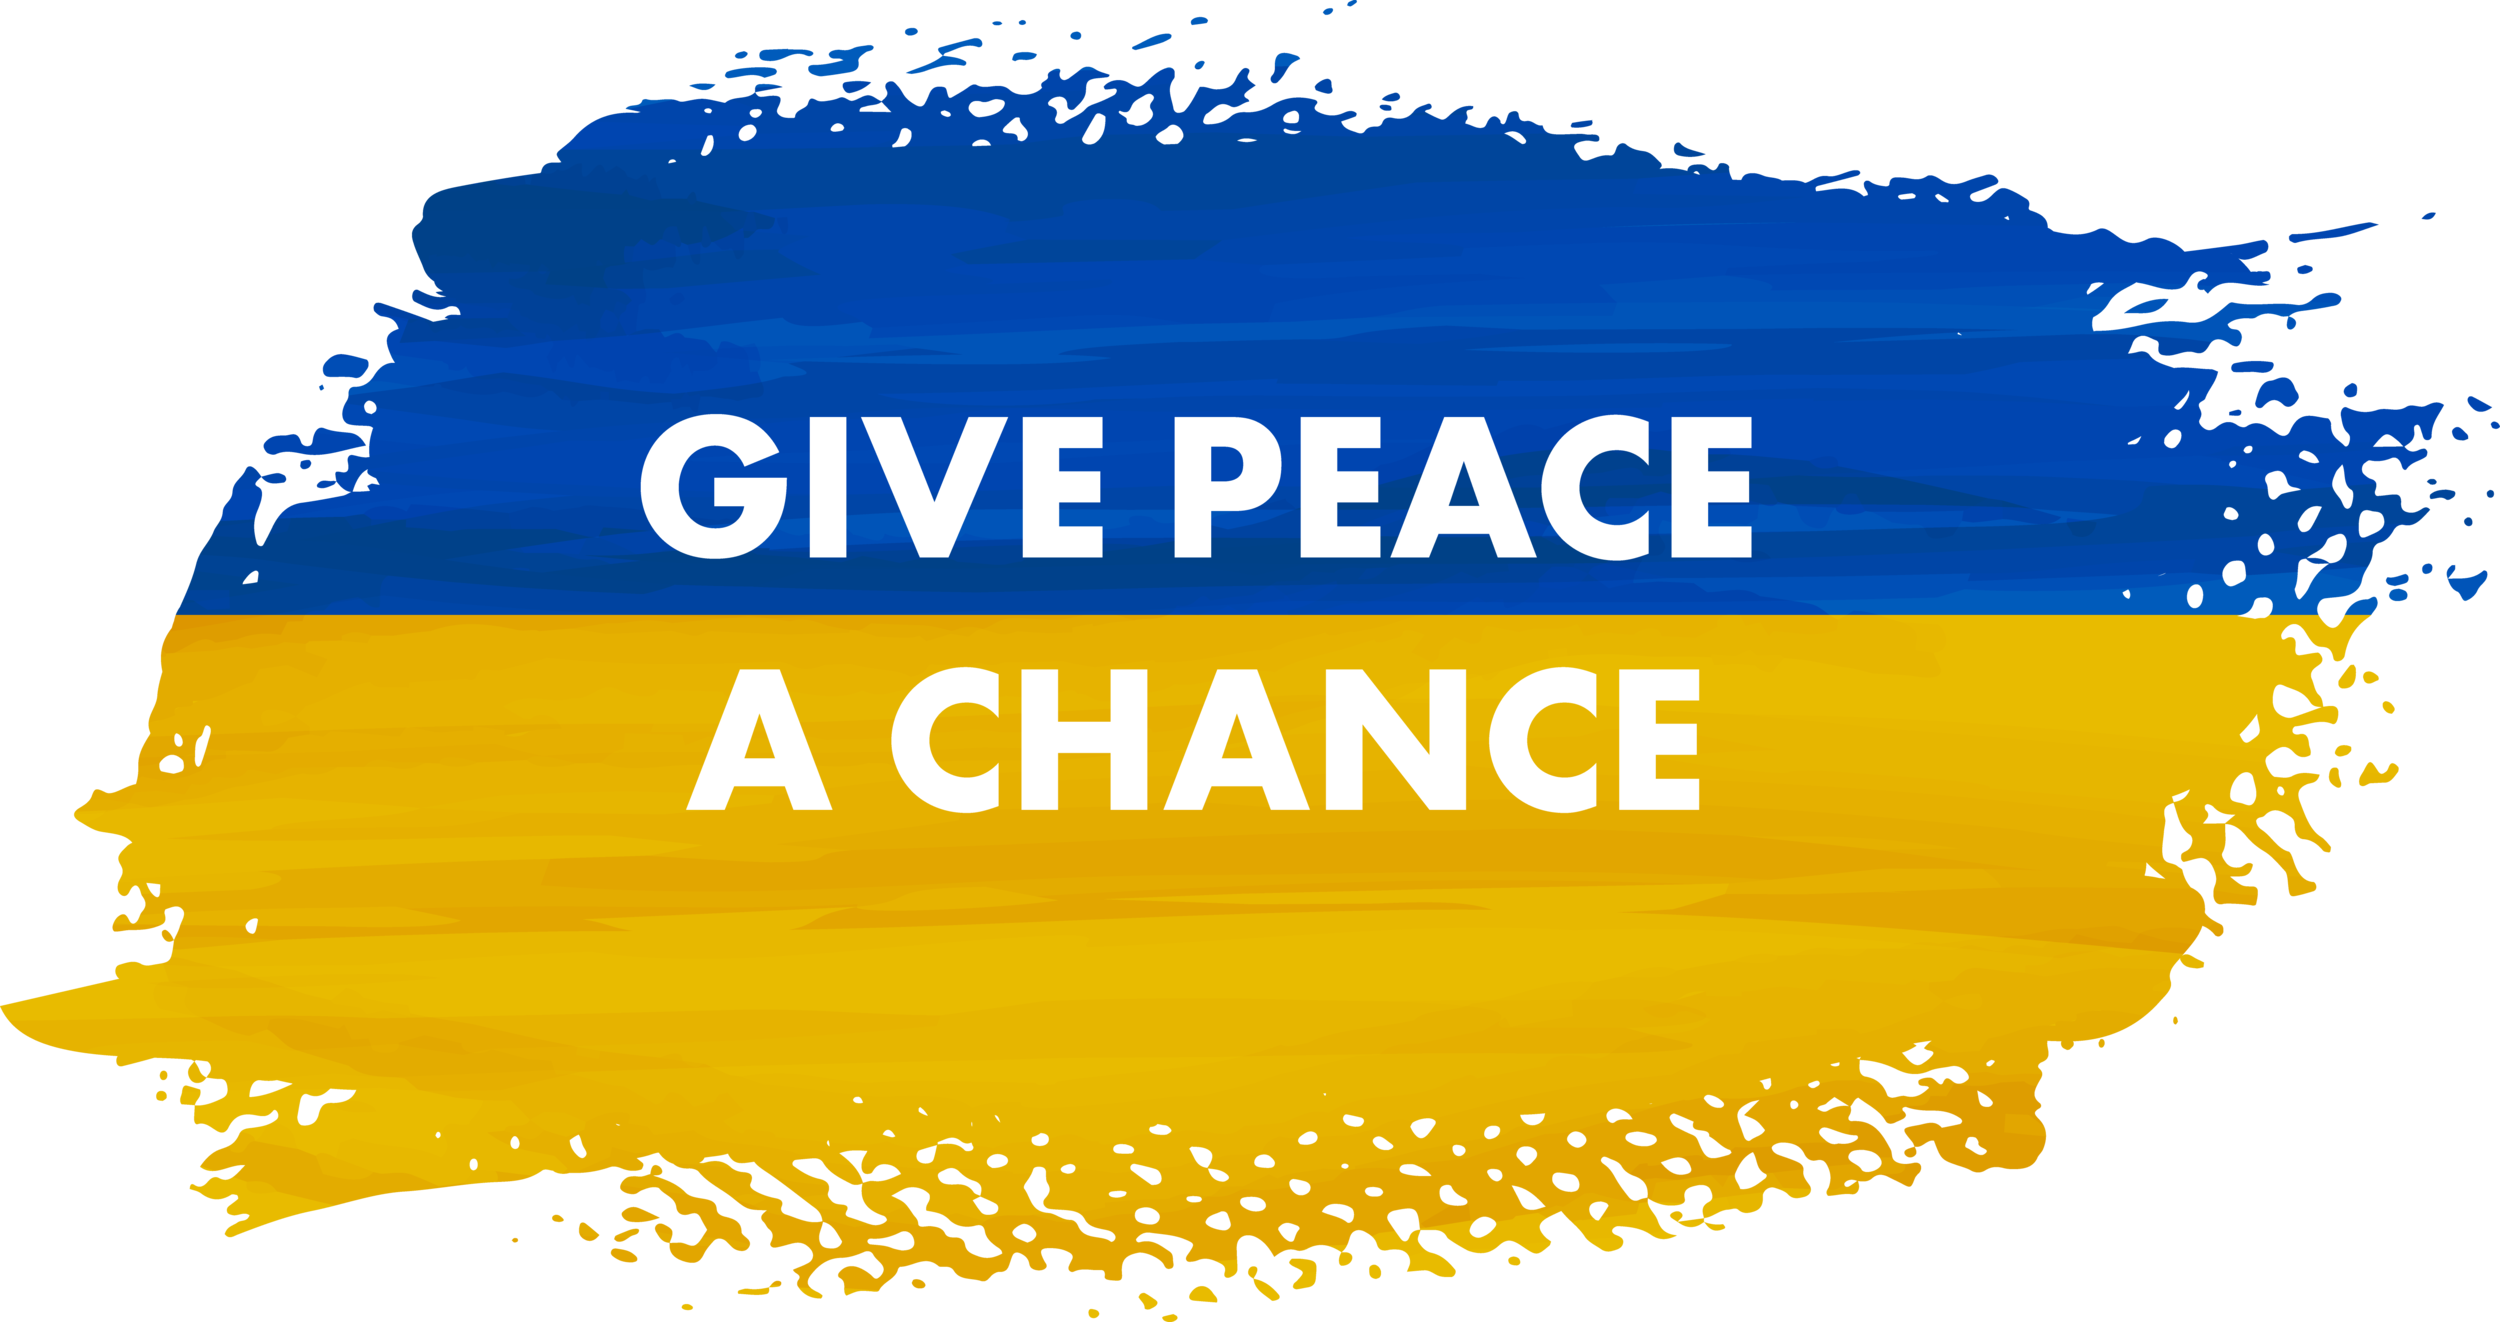 “Give peace a chance!” message from INL Director-General Lars Montelius